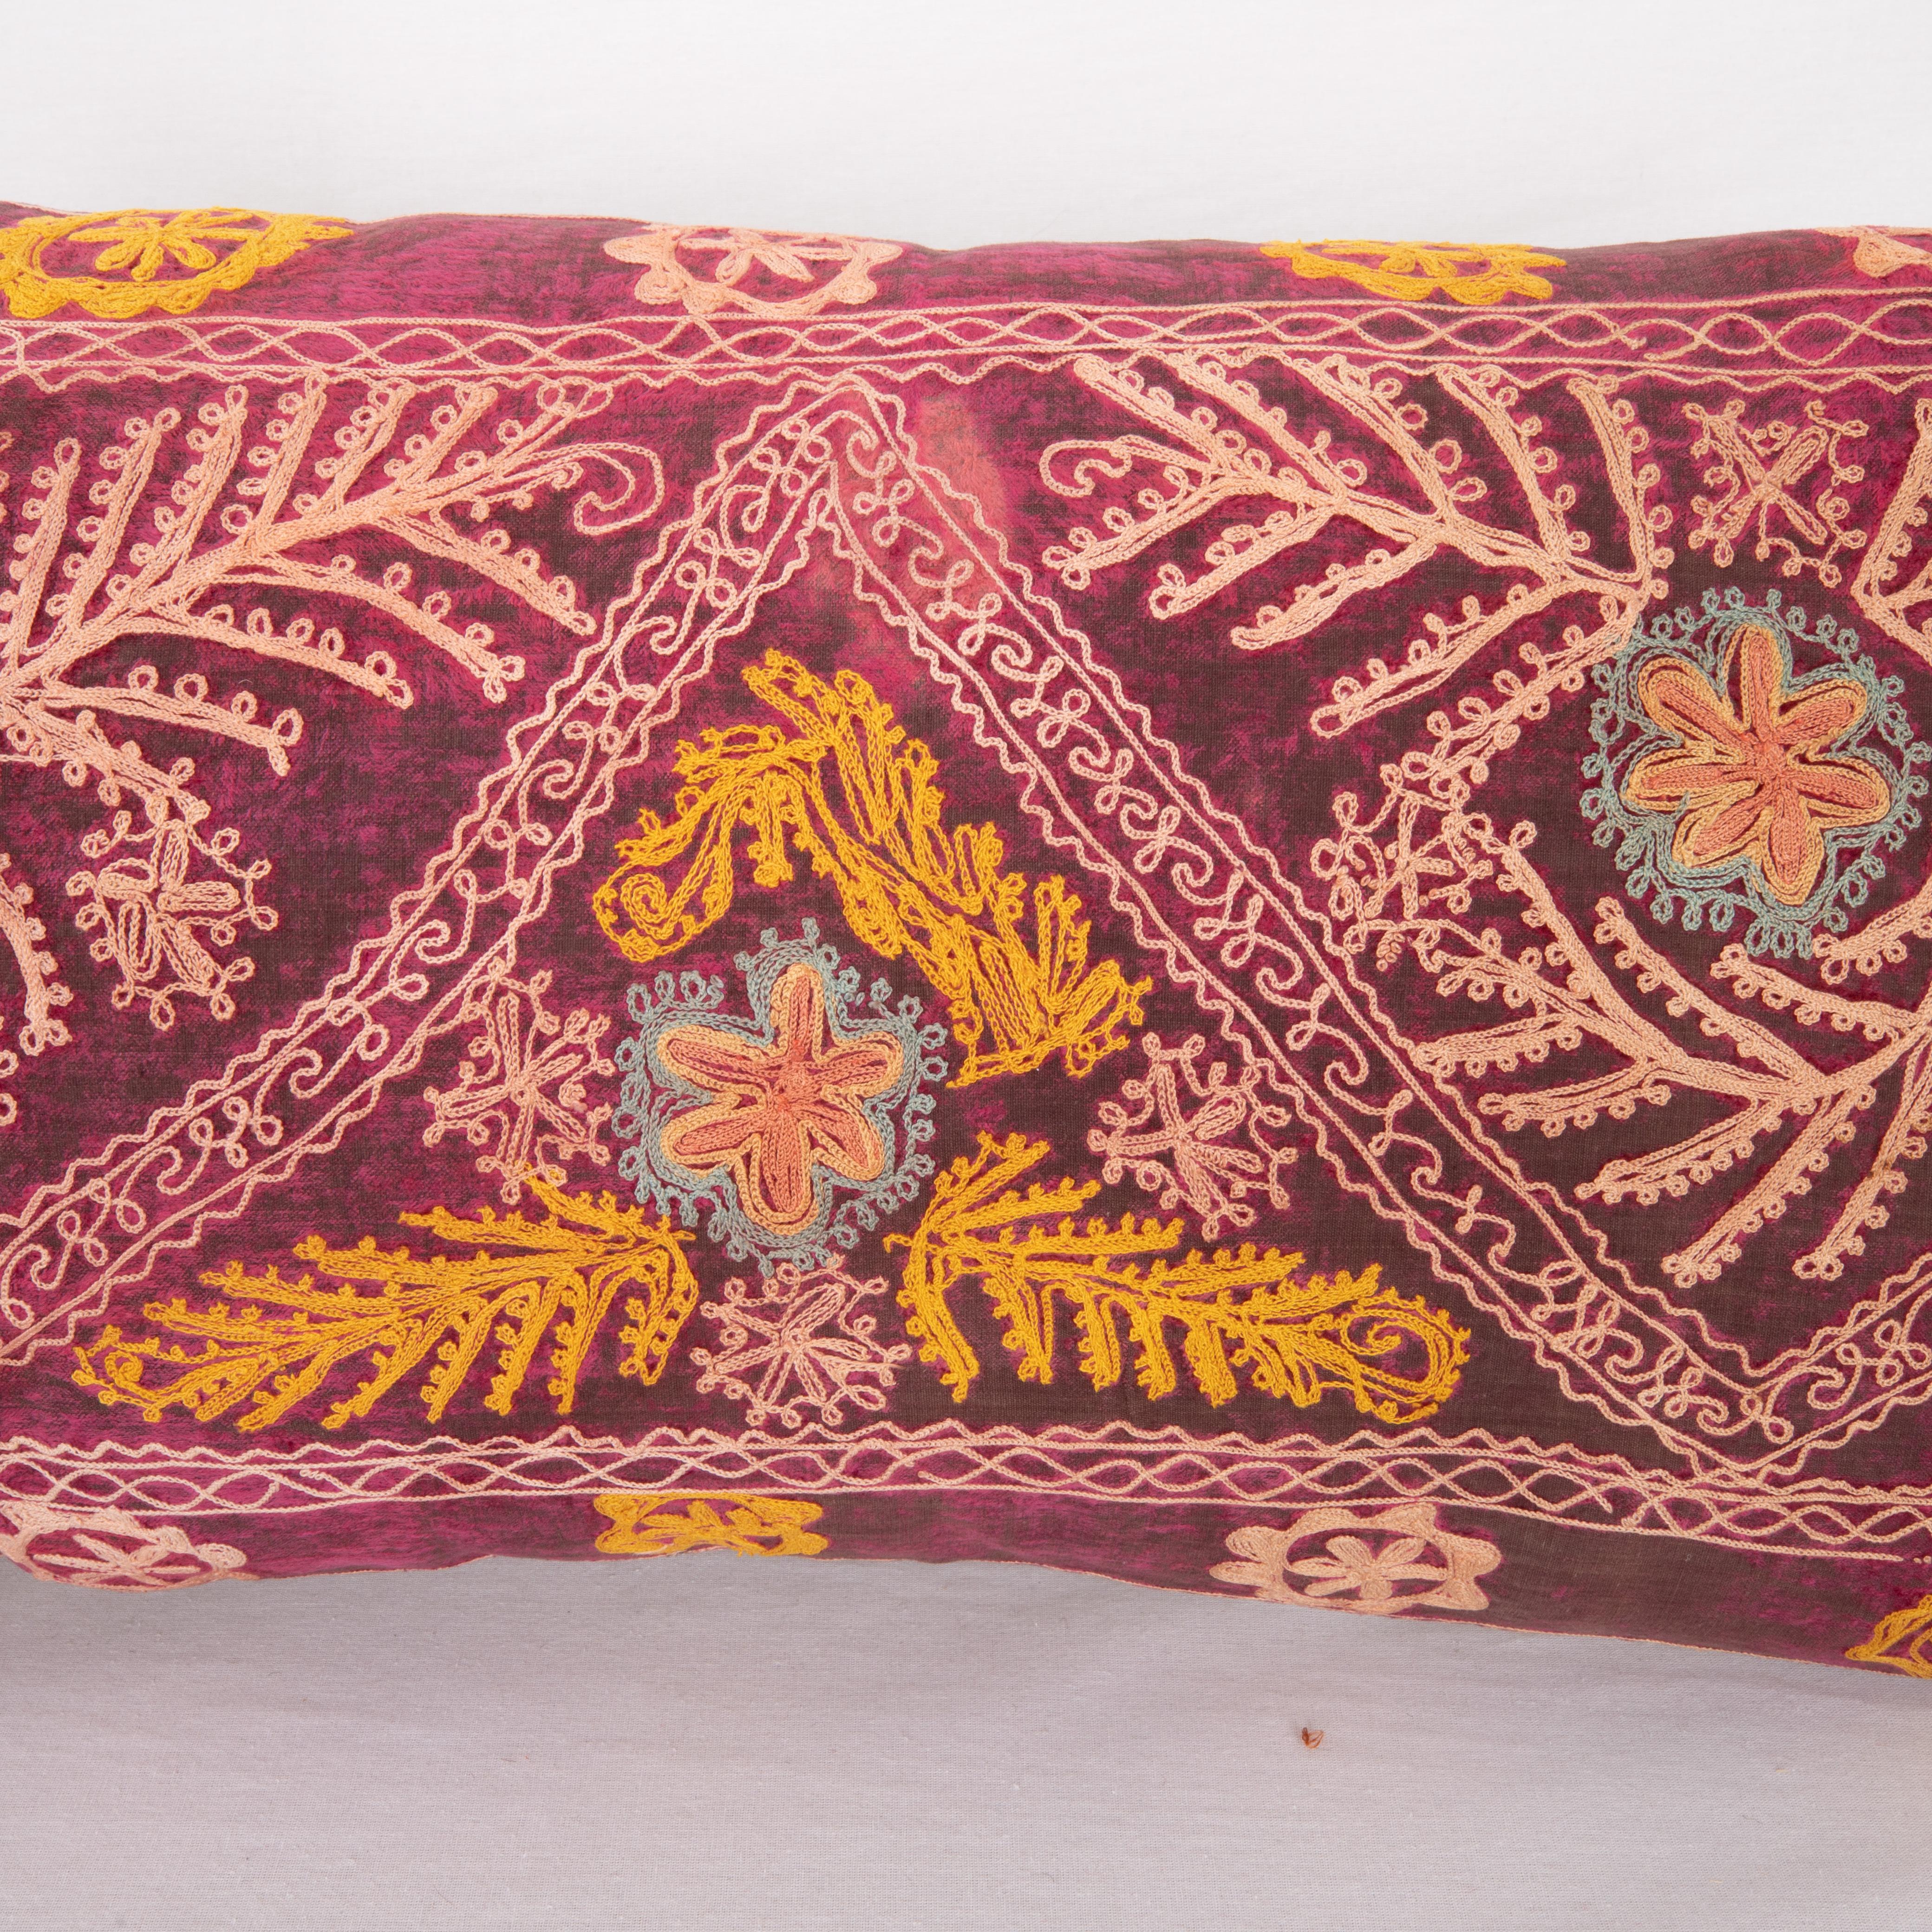 Embroidered Suzani Pillow Case Made from a Vintage Velvet Ground Suzani, Mid-20th C For Sale